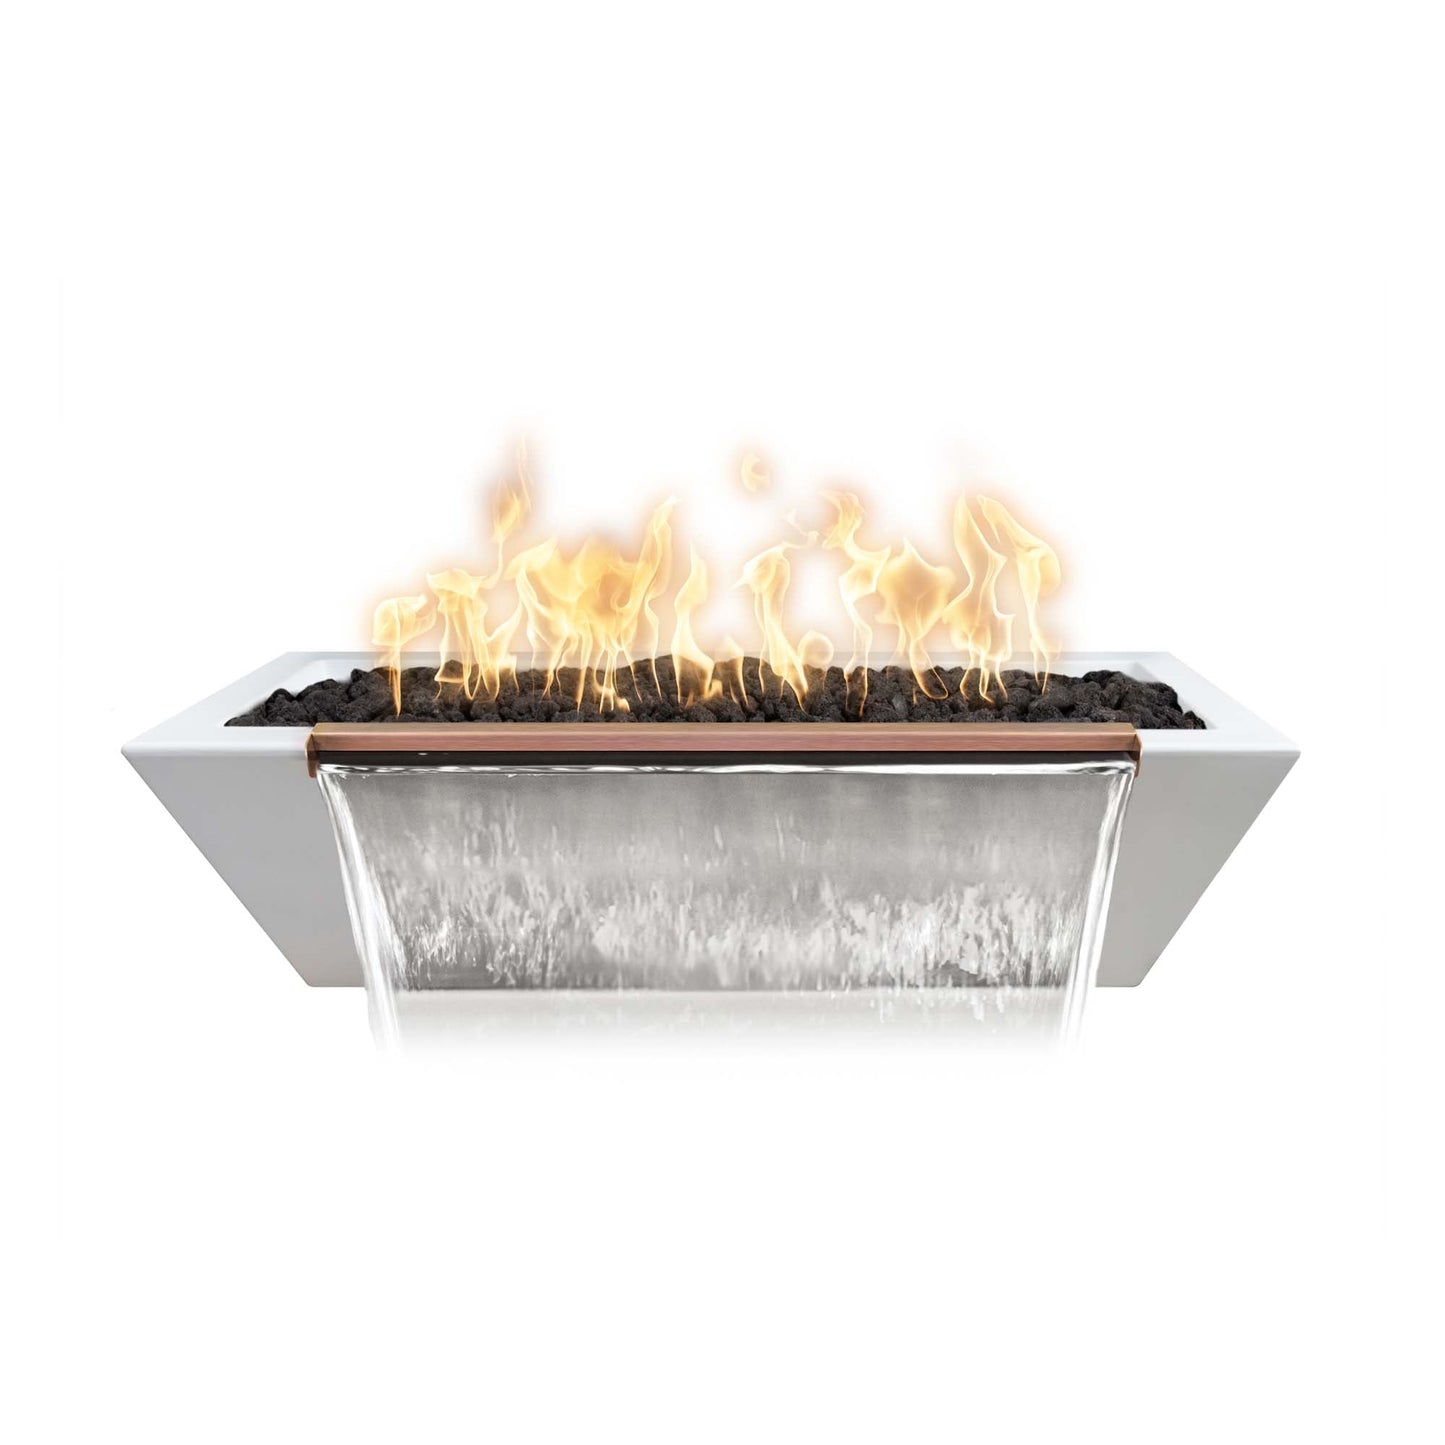 The Outdoor Plus Linear Maya 72" Metallic Bronze GFRC Concrete Liquid Propane Fire & Water Bowl with 12V Electronic Ignition